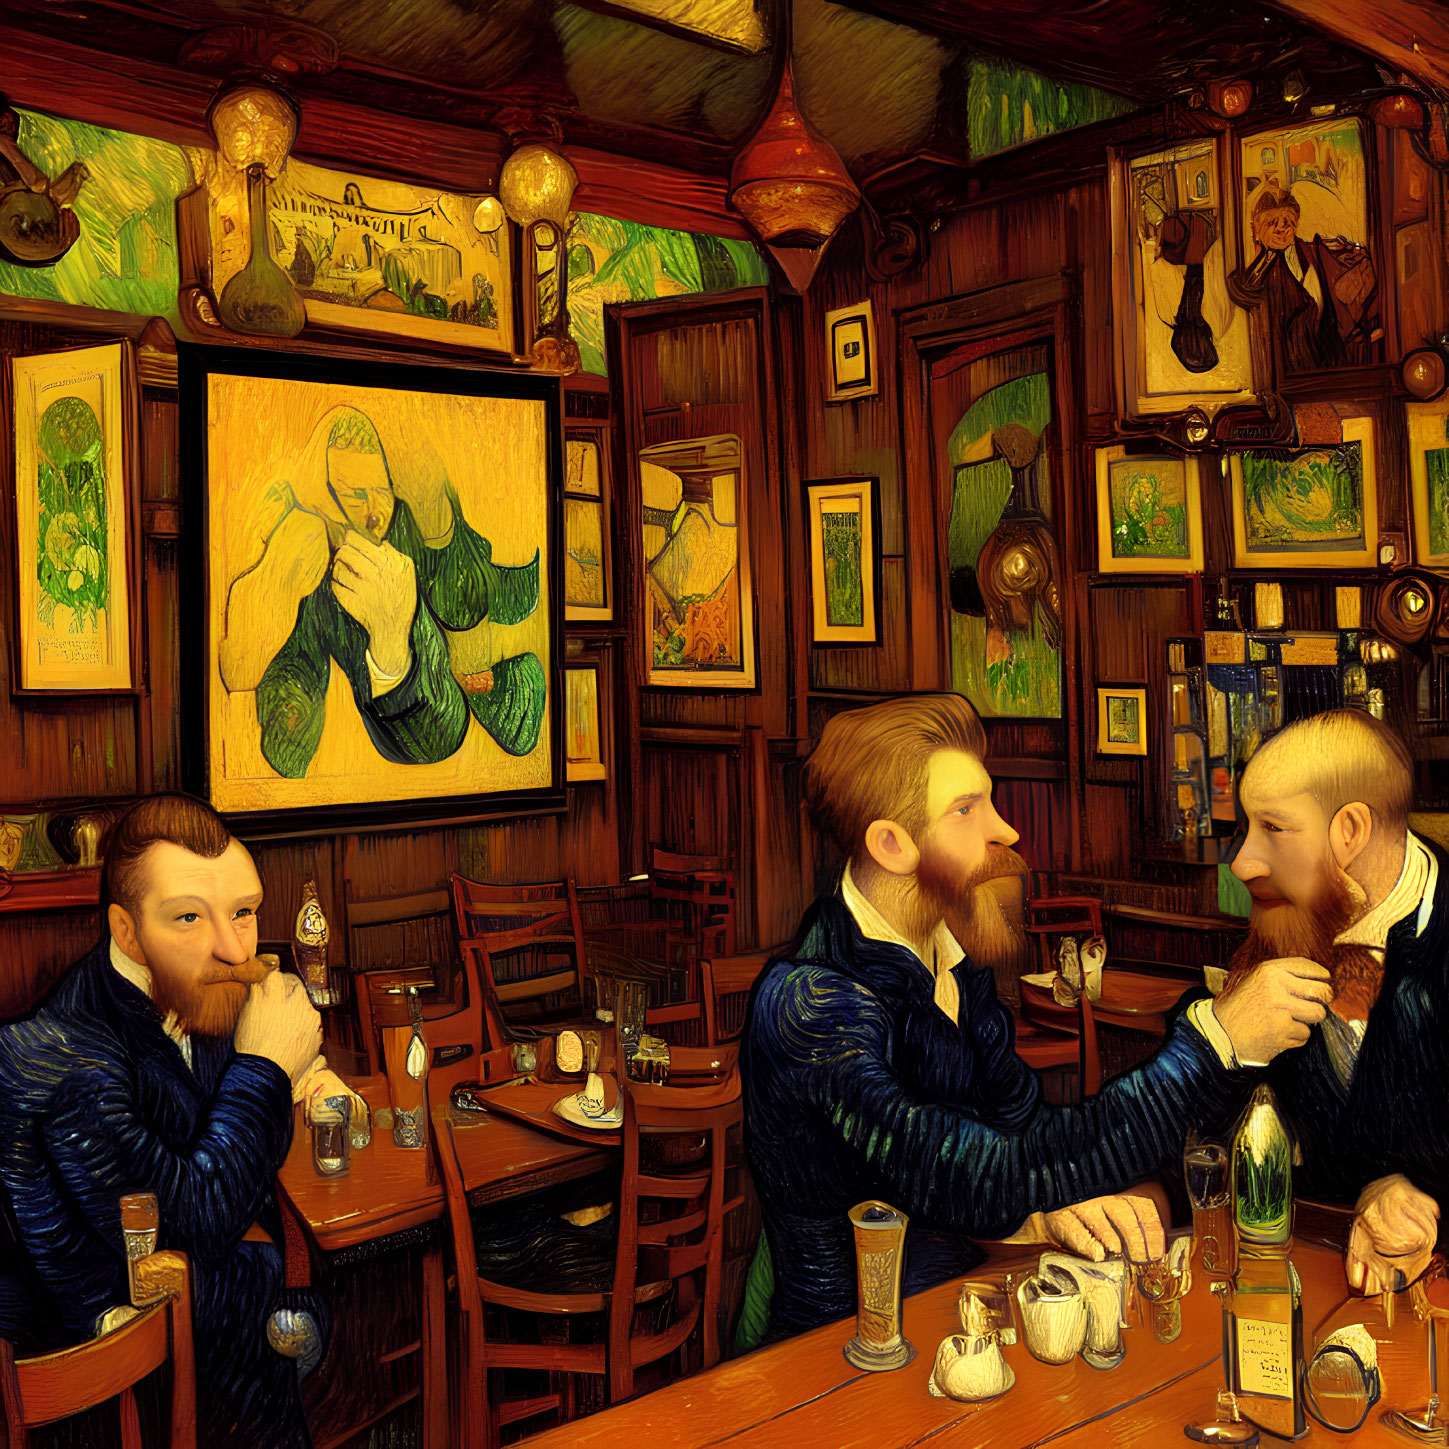 Stylized digital artwork of three bearded men in a colorful, ornamented bar